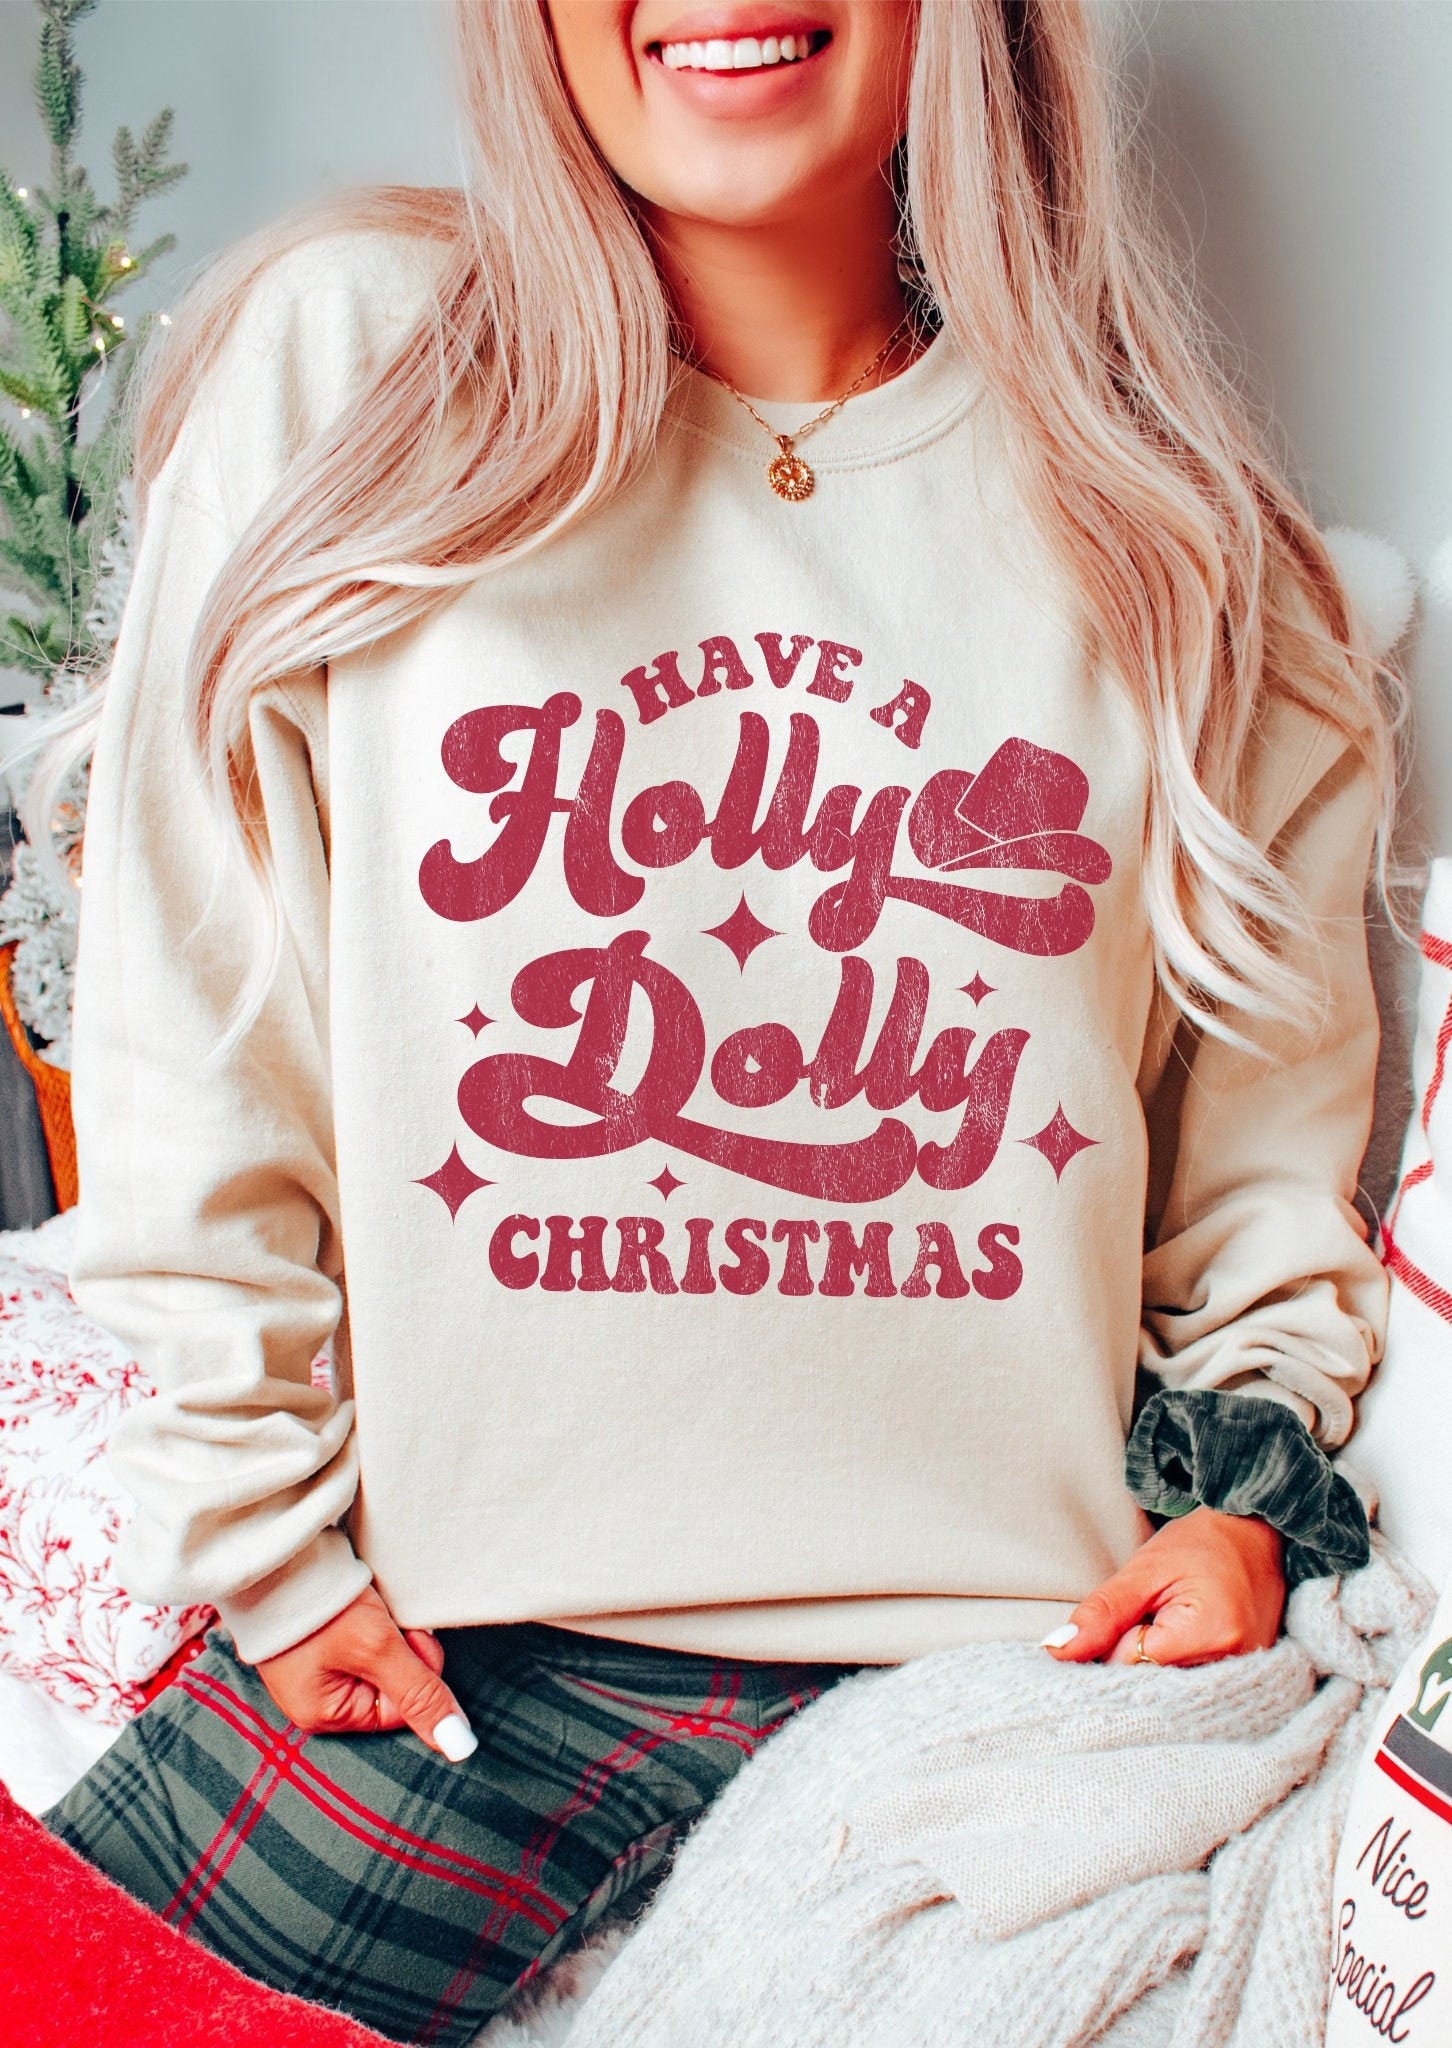 Have a Holly Dolly Christmas Sweatshirt, Country Christmas Sweater, Western Christmas Outfit, Cowgirl Christmas Sweater, Gift for Her